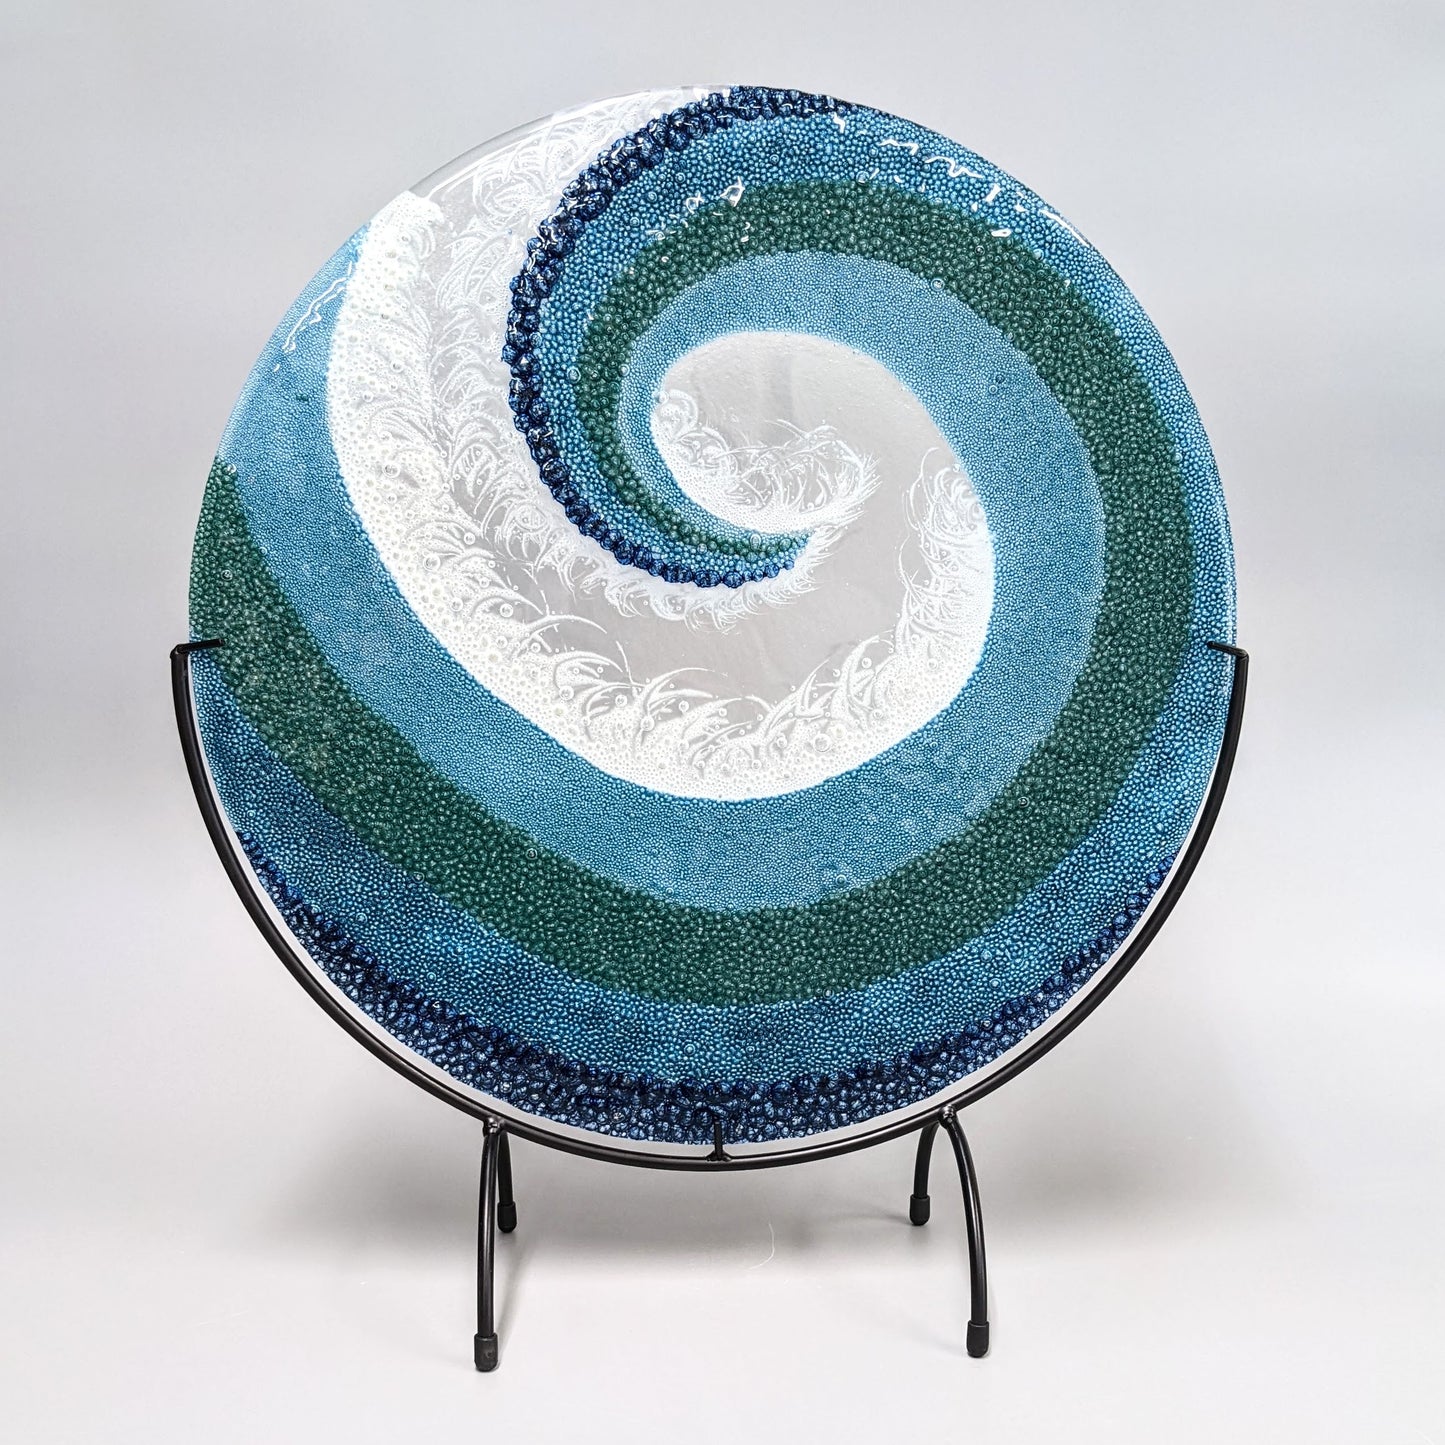 XLarge Fused Glass Art Crashing Ocean Wave with Stand | Pipeline Waves